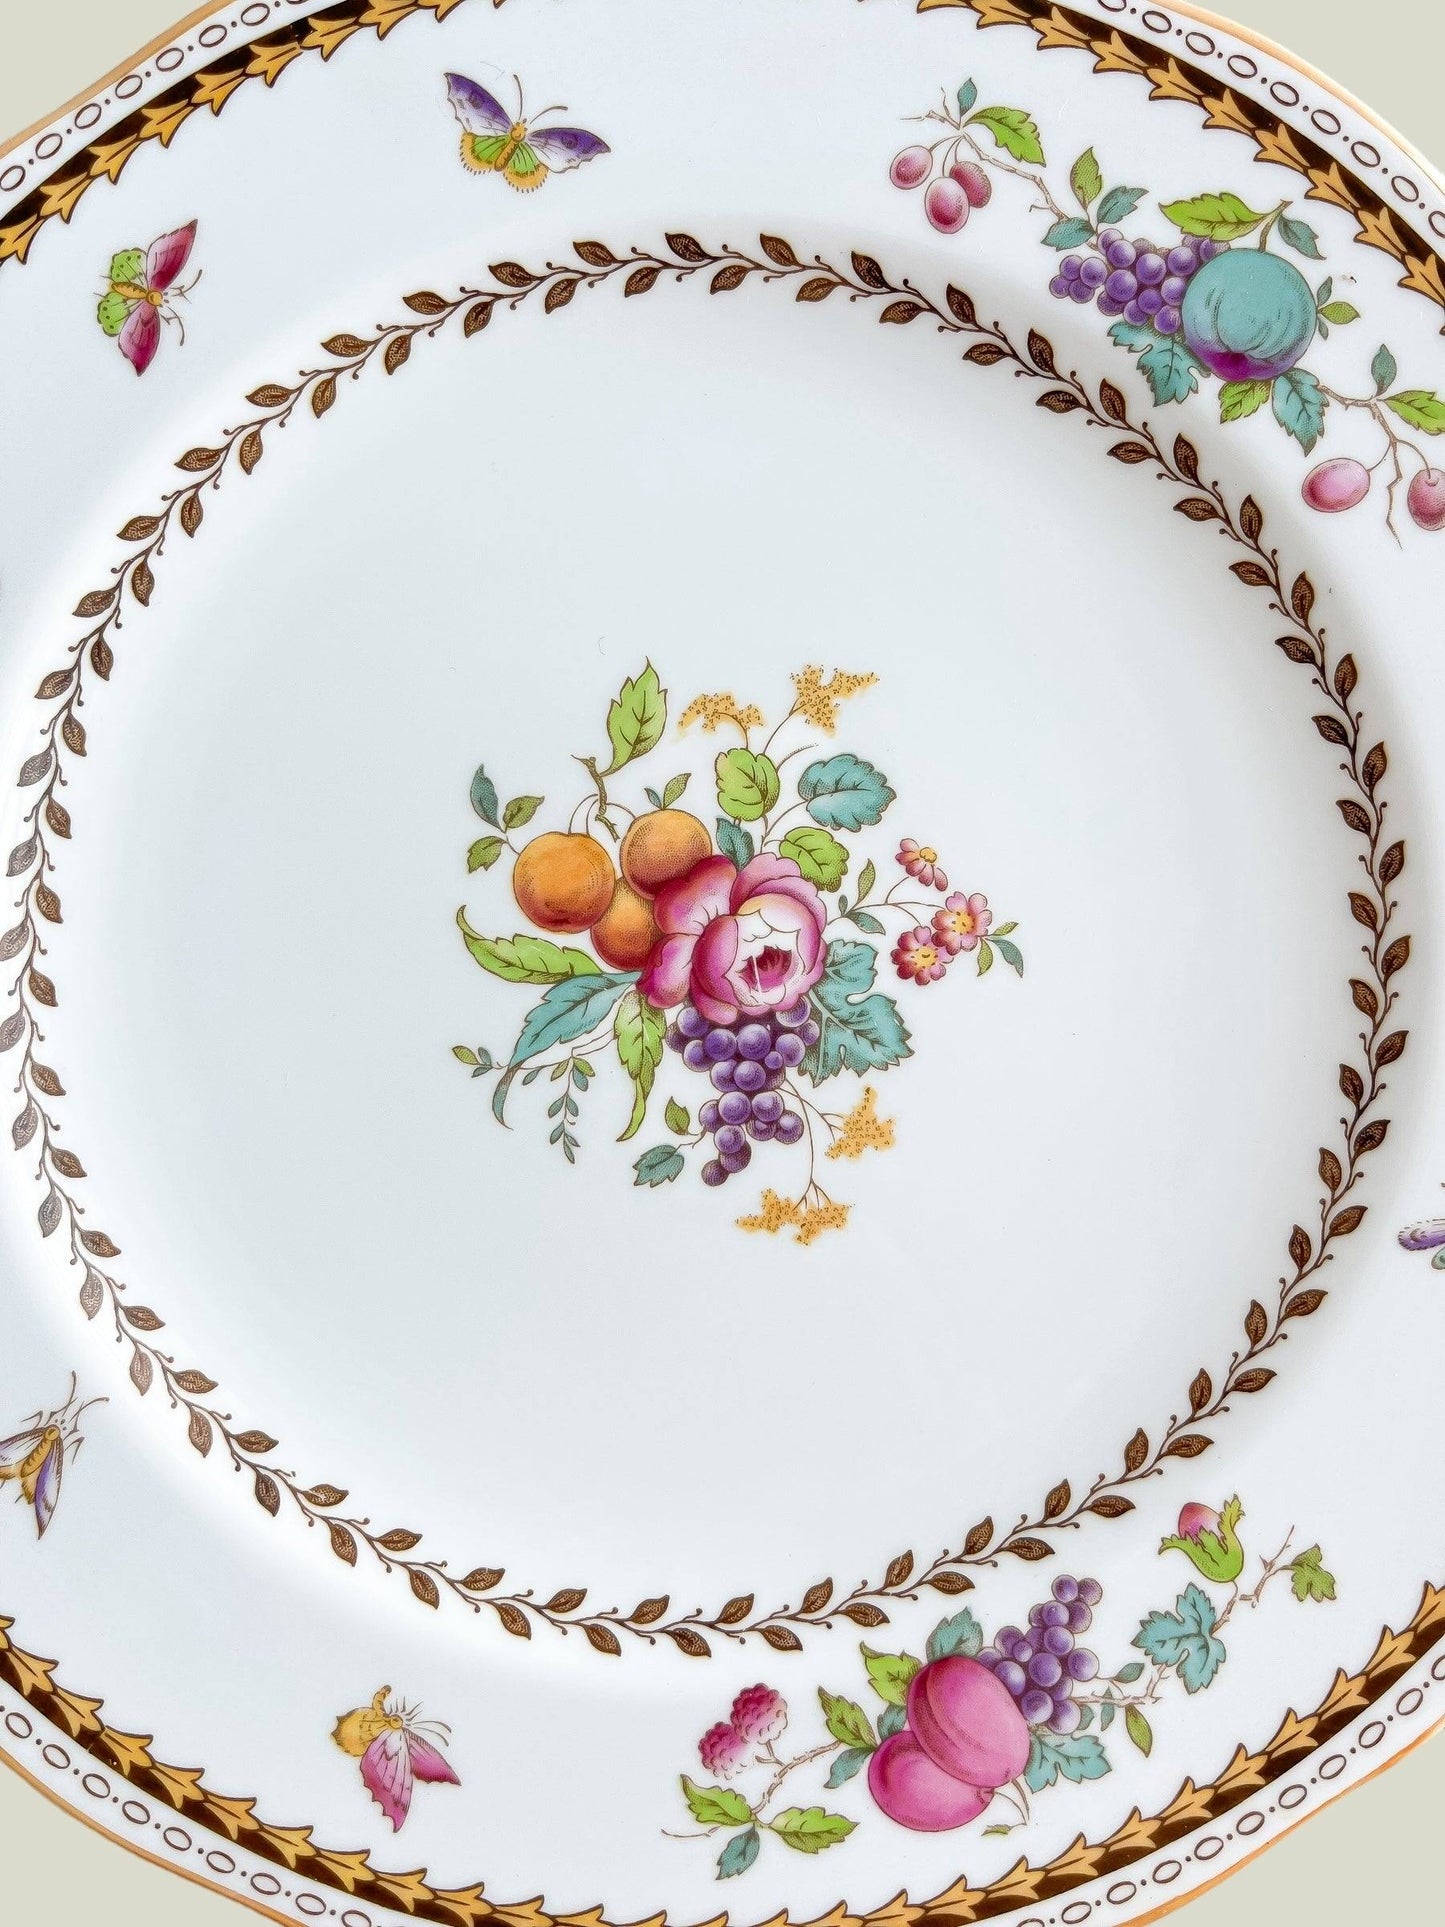 Spode Luncheon Plate - 'Rockingham' Collection (Modern Version) - SOSC Home